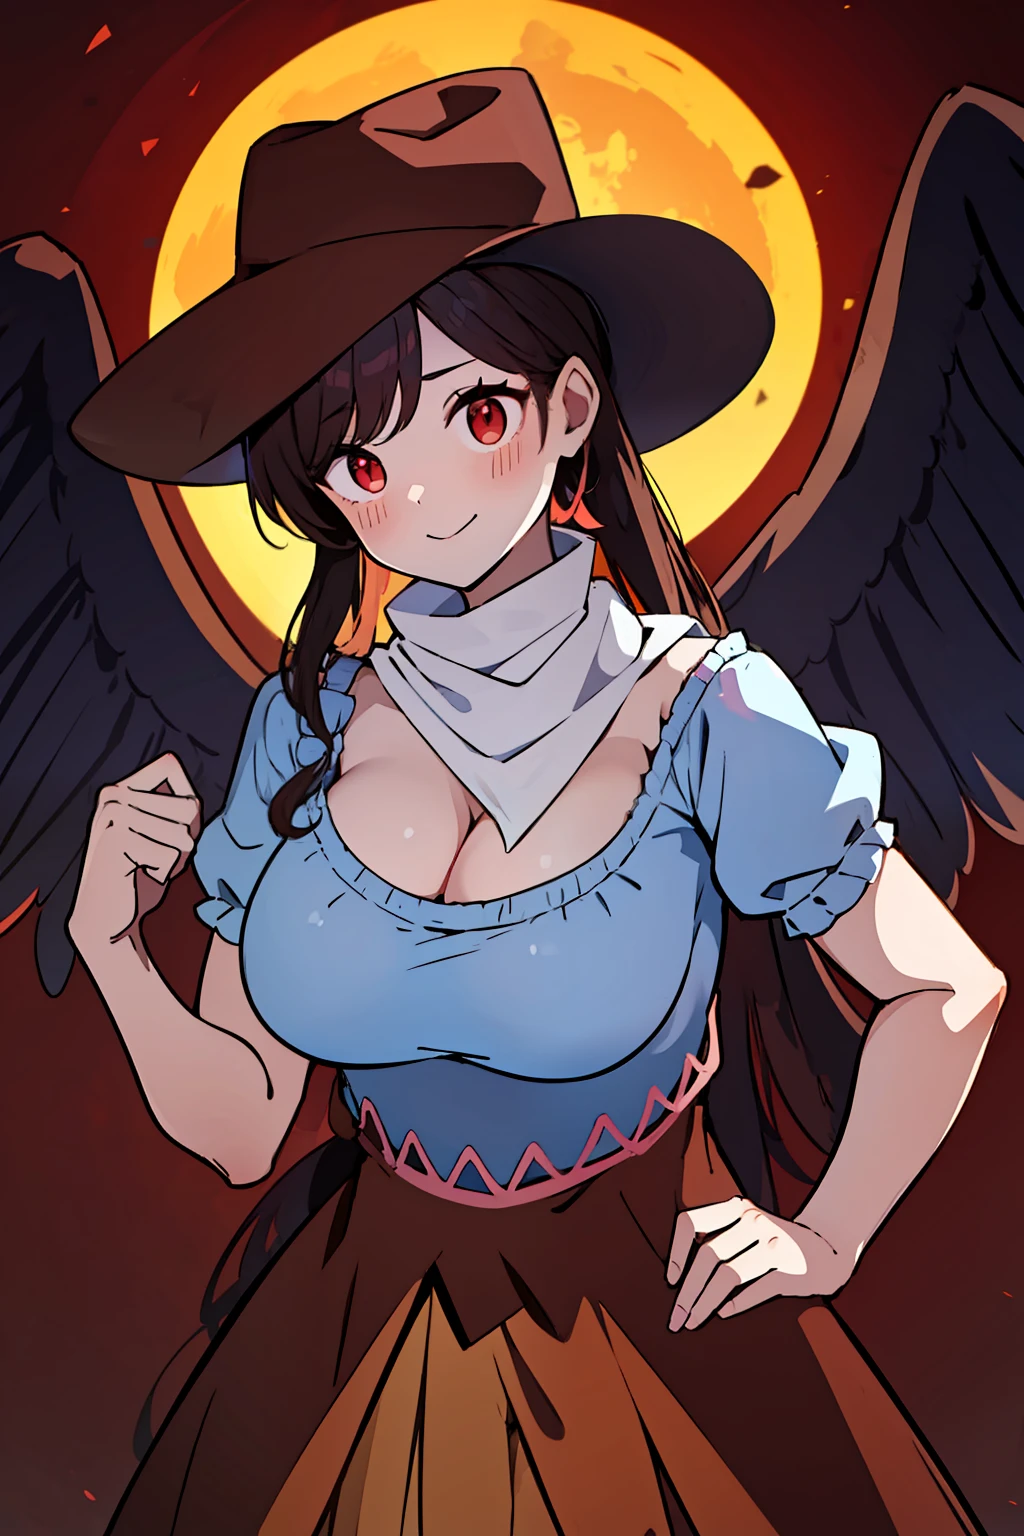 (masterpiece),best quality, expressive eyes, perfect face, 1girl,
big breast, H-cup, good breast, beautiful, gorgeous,anime,girl,lora, floating clothes, tent chest ,
 nipple visible  though clothes,Saki Kurokoma,
red eyes,
black hair,
short hair,
long ponytail,
black wings,
black horse tail,
brown cowboy hat,
brown boots,
light blue plaid shirt,
light pink shirt,
brown plaid skirt,
light orange skirt,
shoulders,
white bandana tied around neck,hands on waist, hands on hips,crazy smile,yameroyandere,yandere,crazy eyes,dark,glowing eyes,shaded face,empty eyes